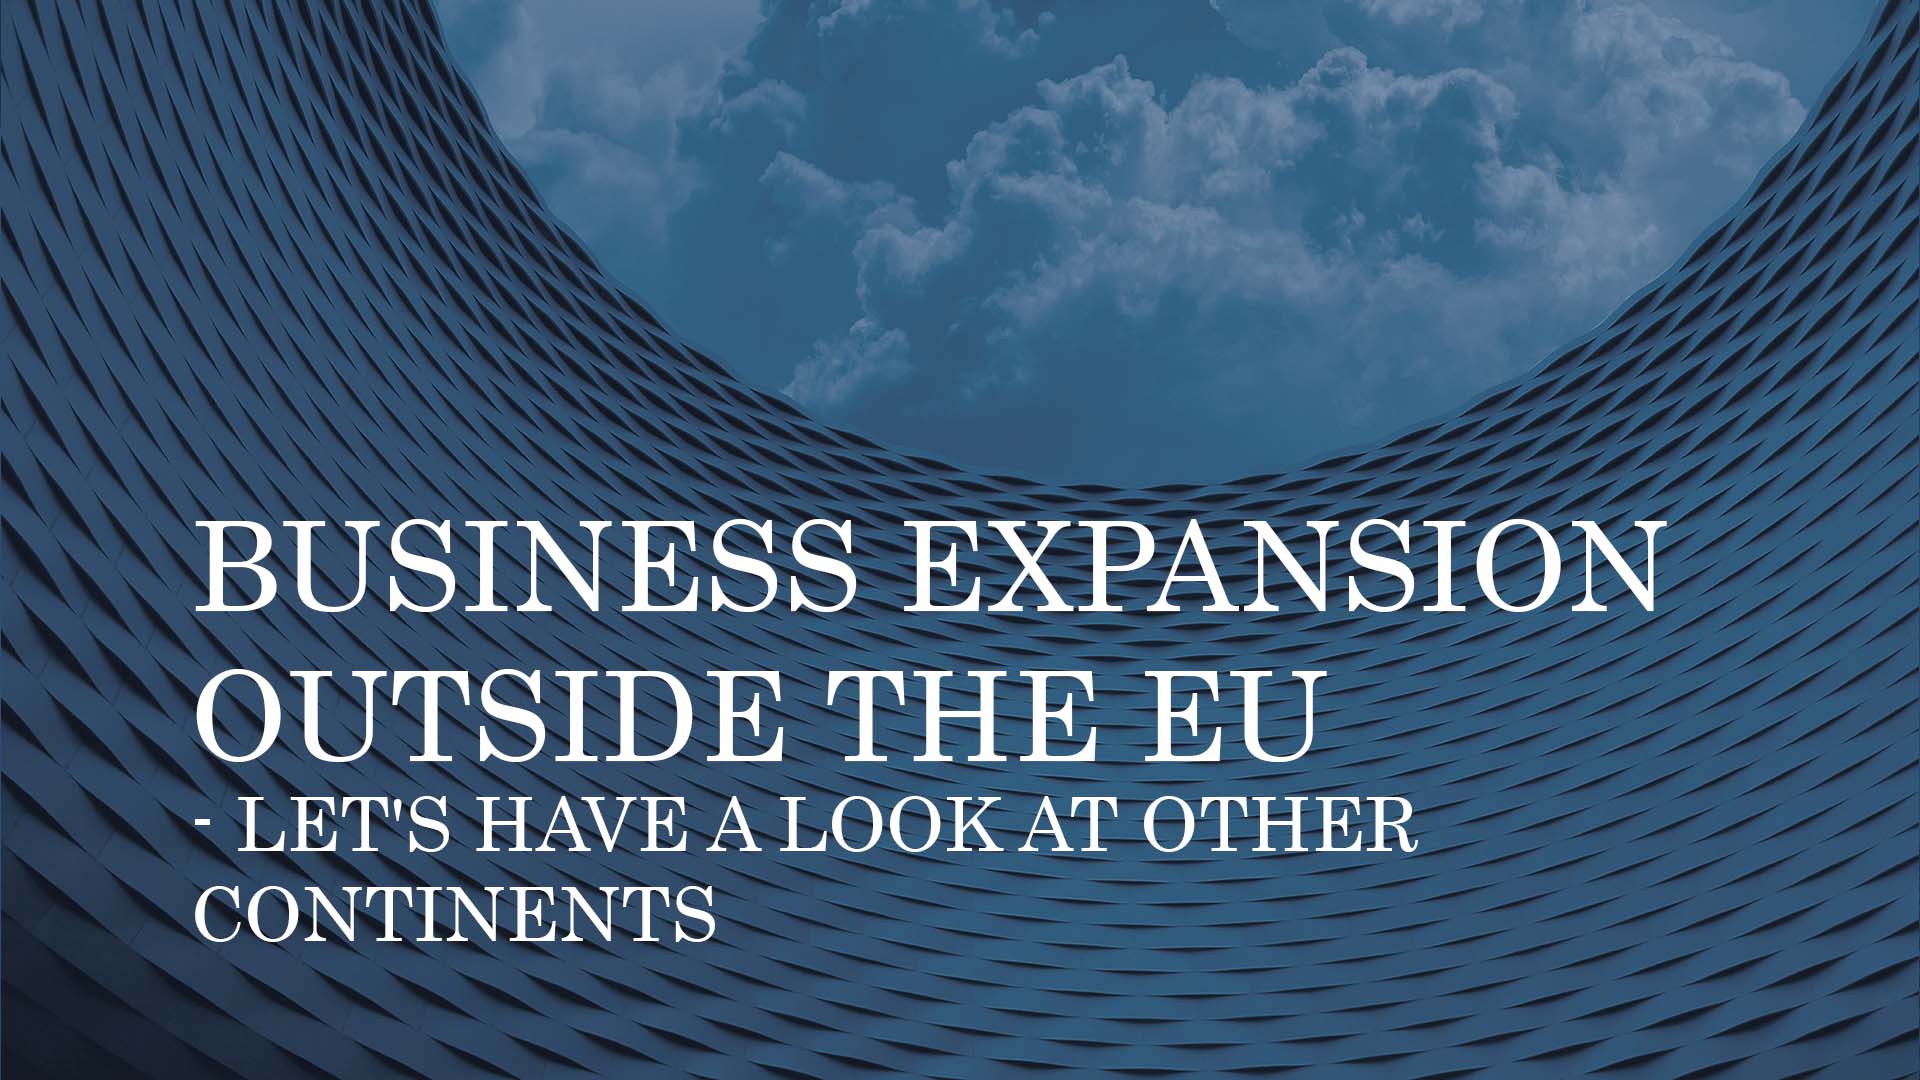 BUSINESS EXPANSION OUTSIDE THE EU – LET'S HAVE A LOOK AT OTHER CONTINENTS